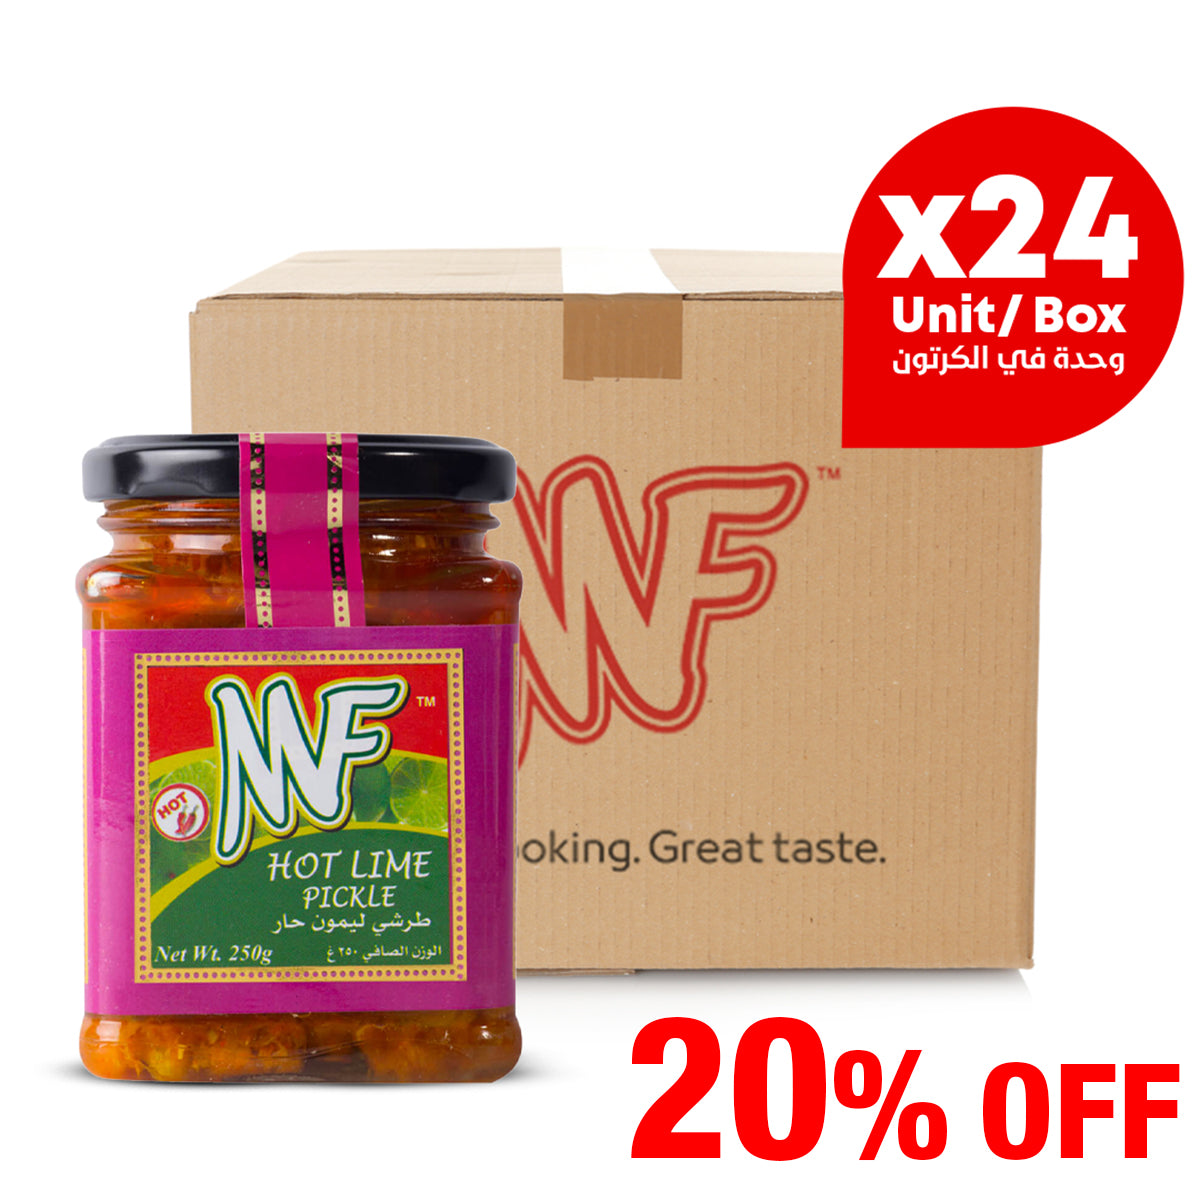 MF Hot Lime Pickle 24x250g